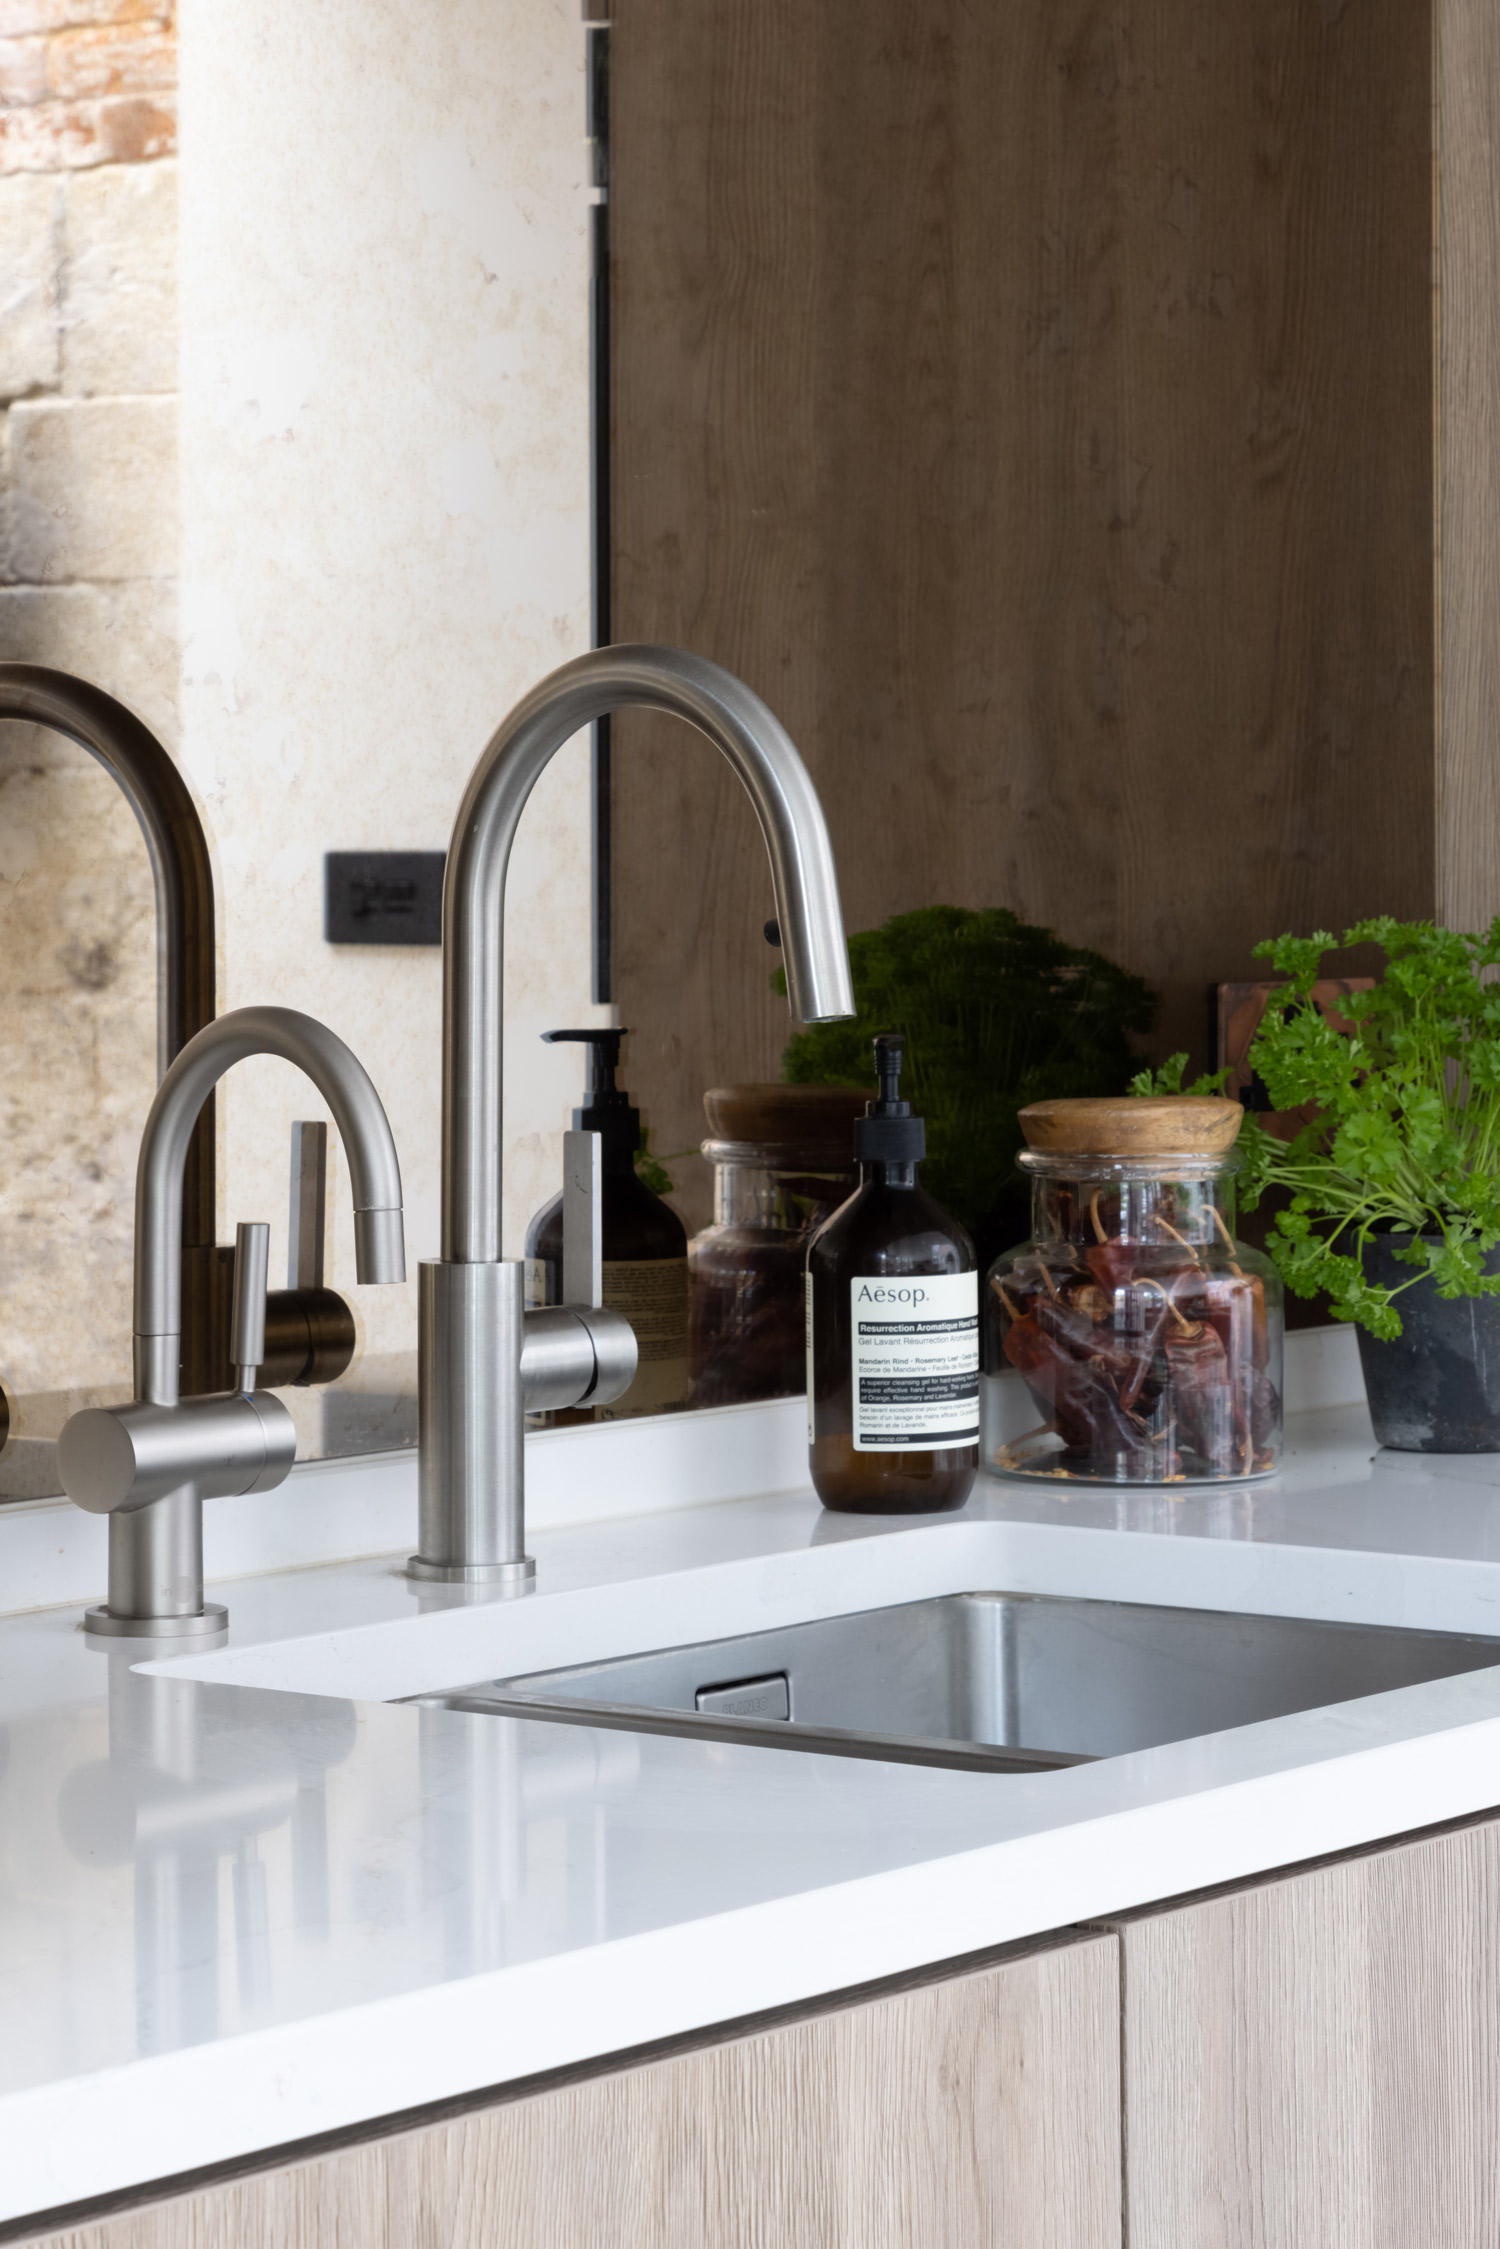 Island Statement Sink & Tap | The Myers Touch